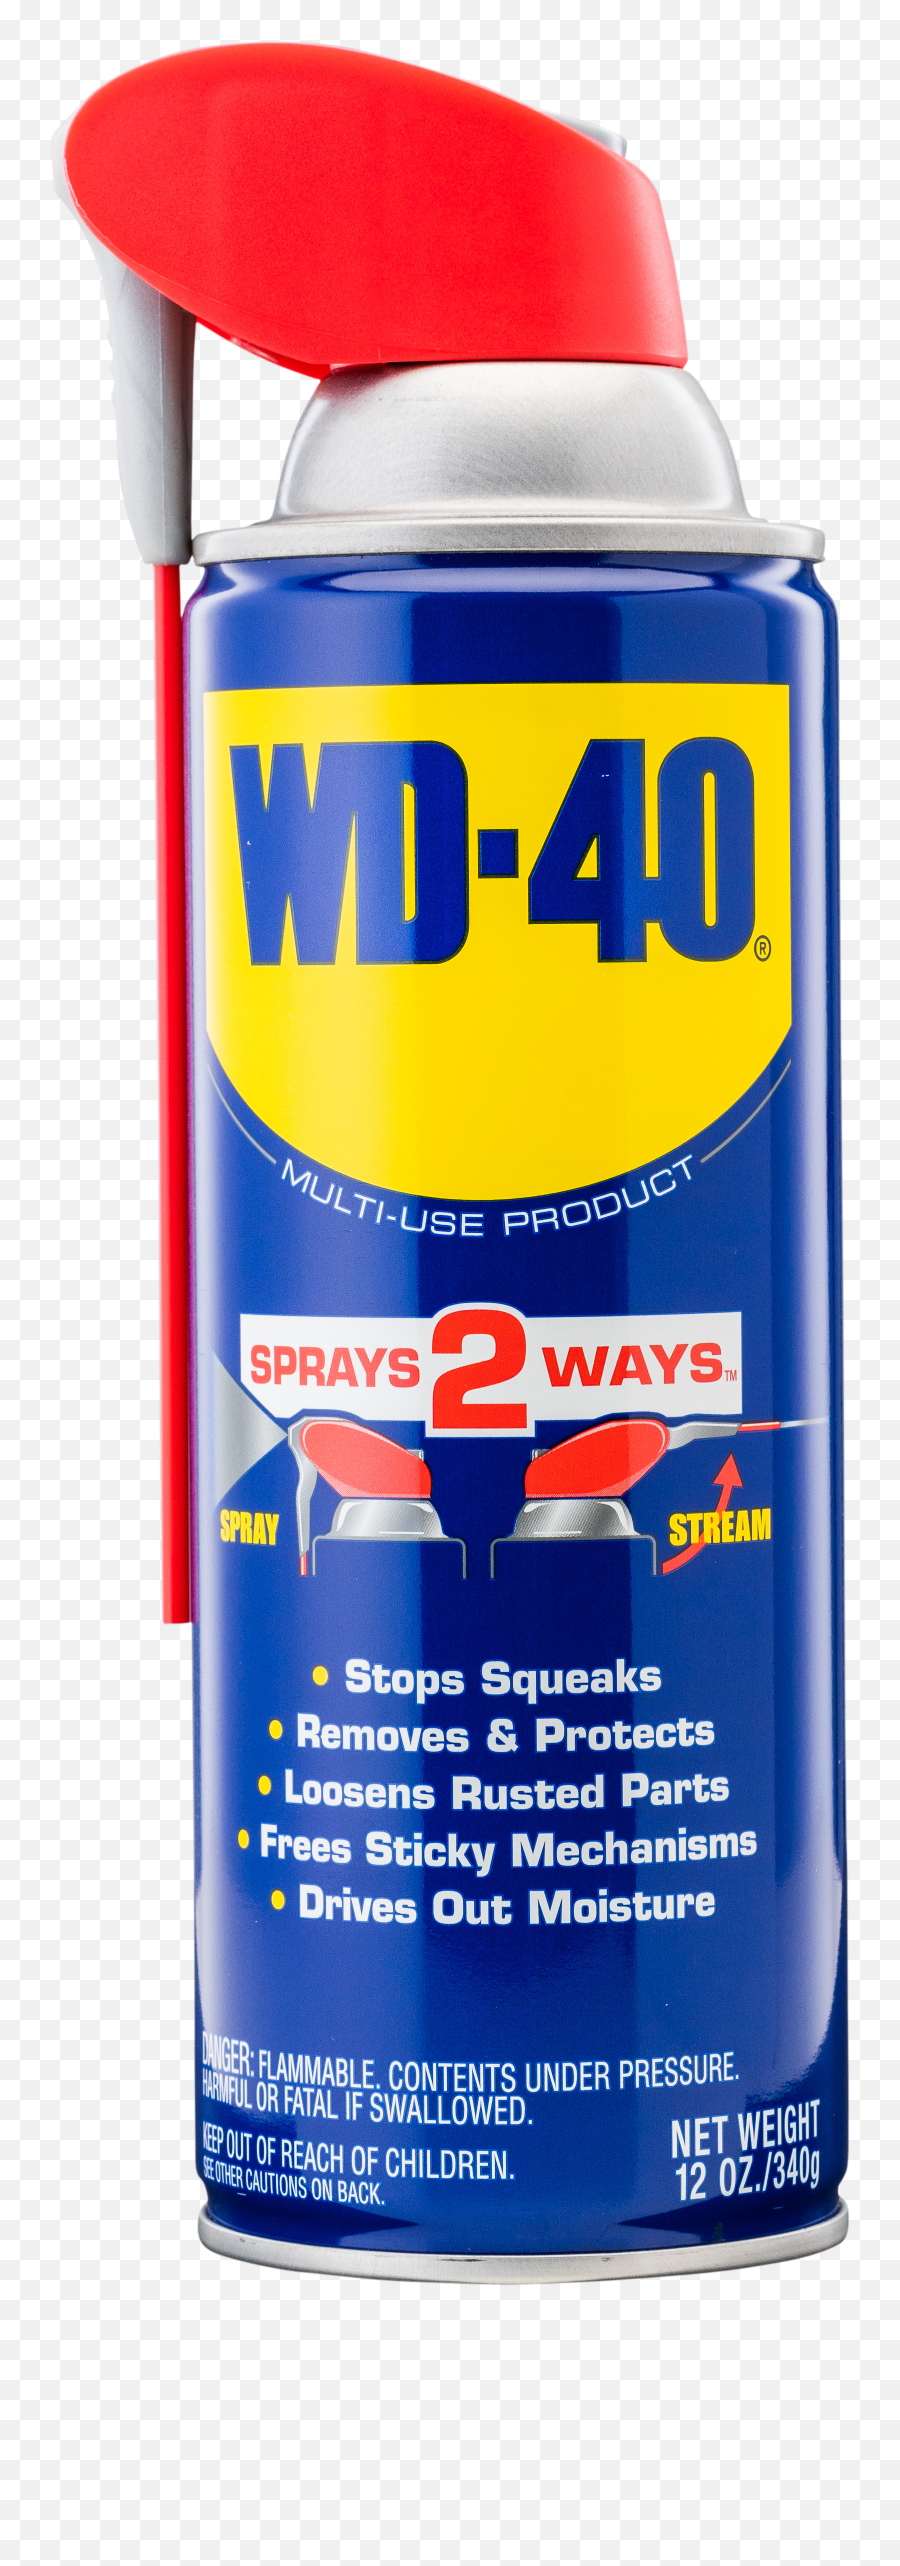 Image Library - Wd 40 Emoji,Can Png